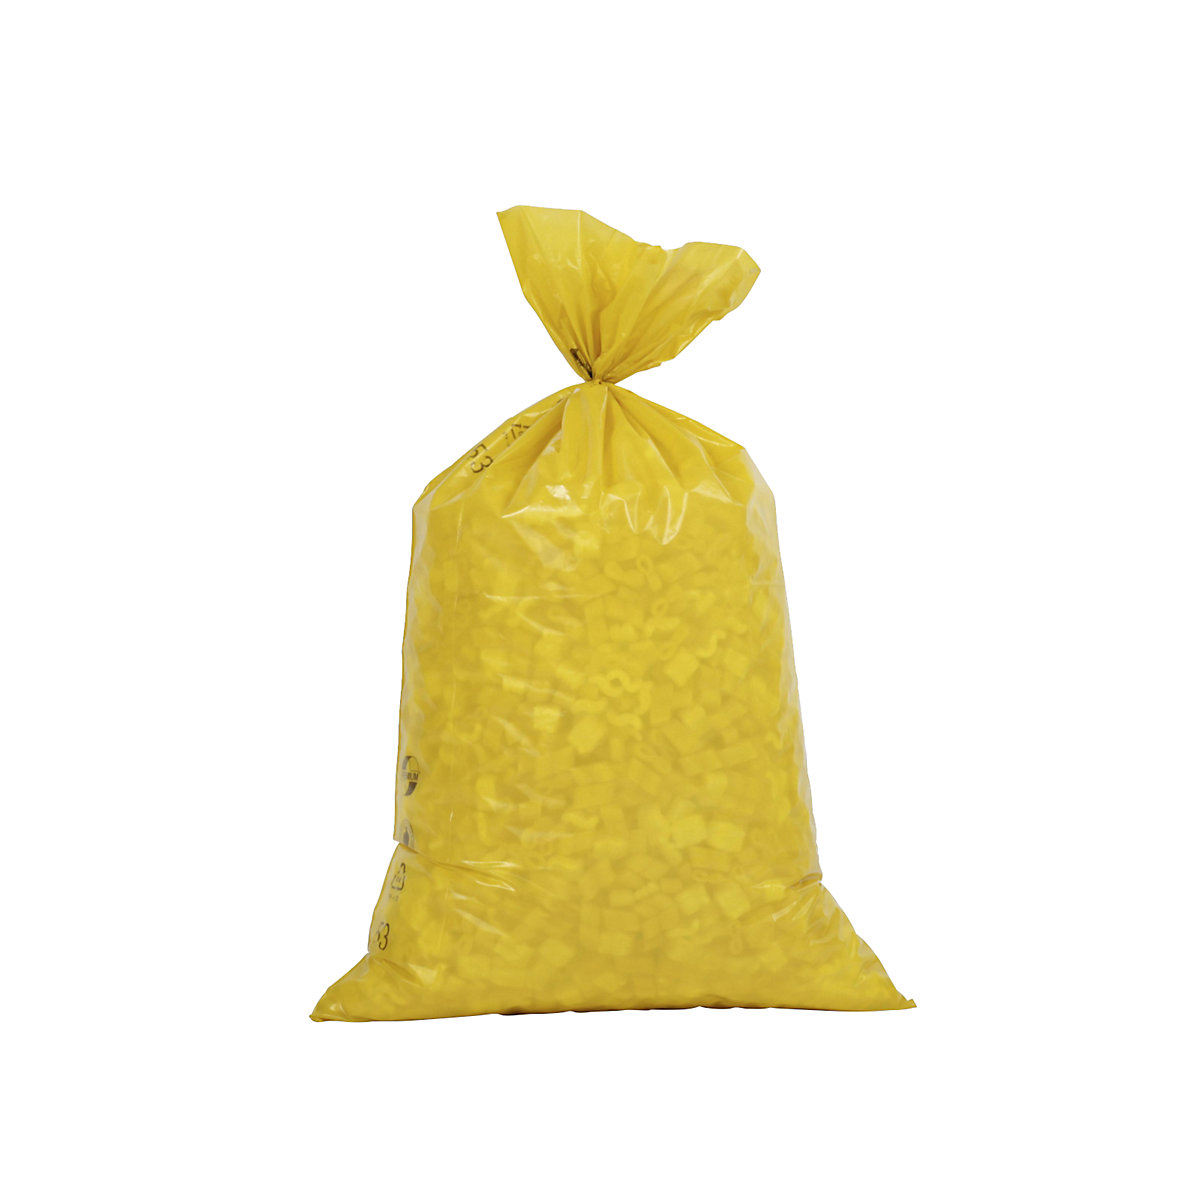 Standard waste sacks, LDPE, 70 l, 60 µm, WxH 575 x 1000 mm, pack of 250, yellow-5